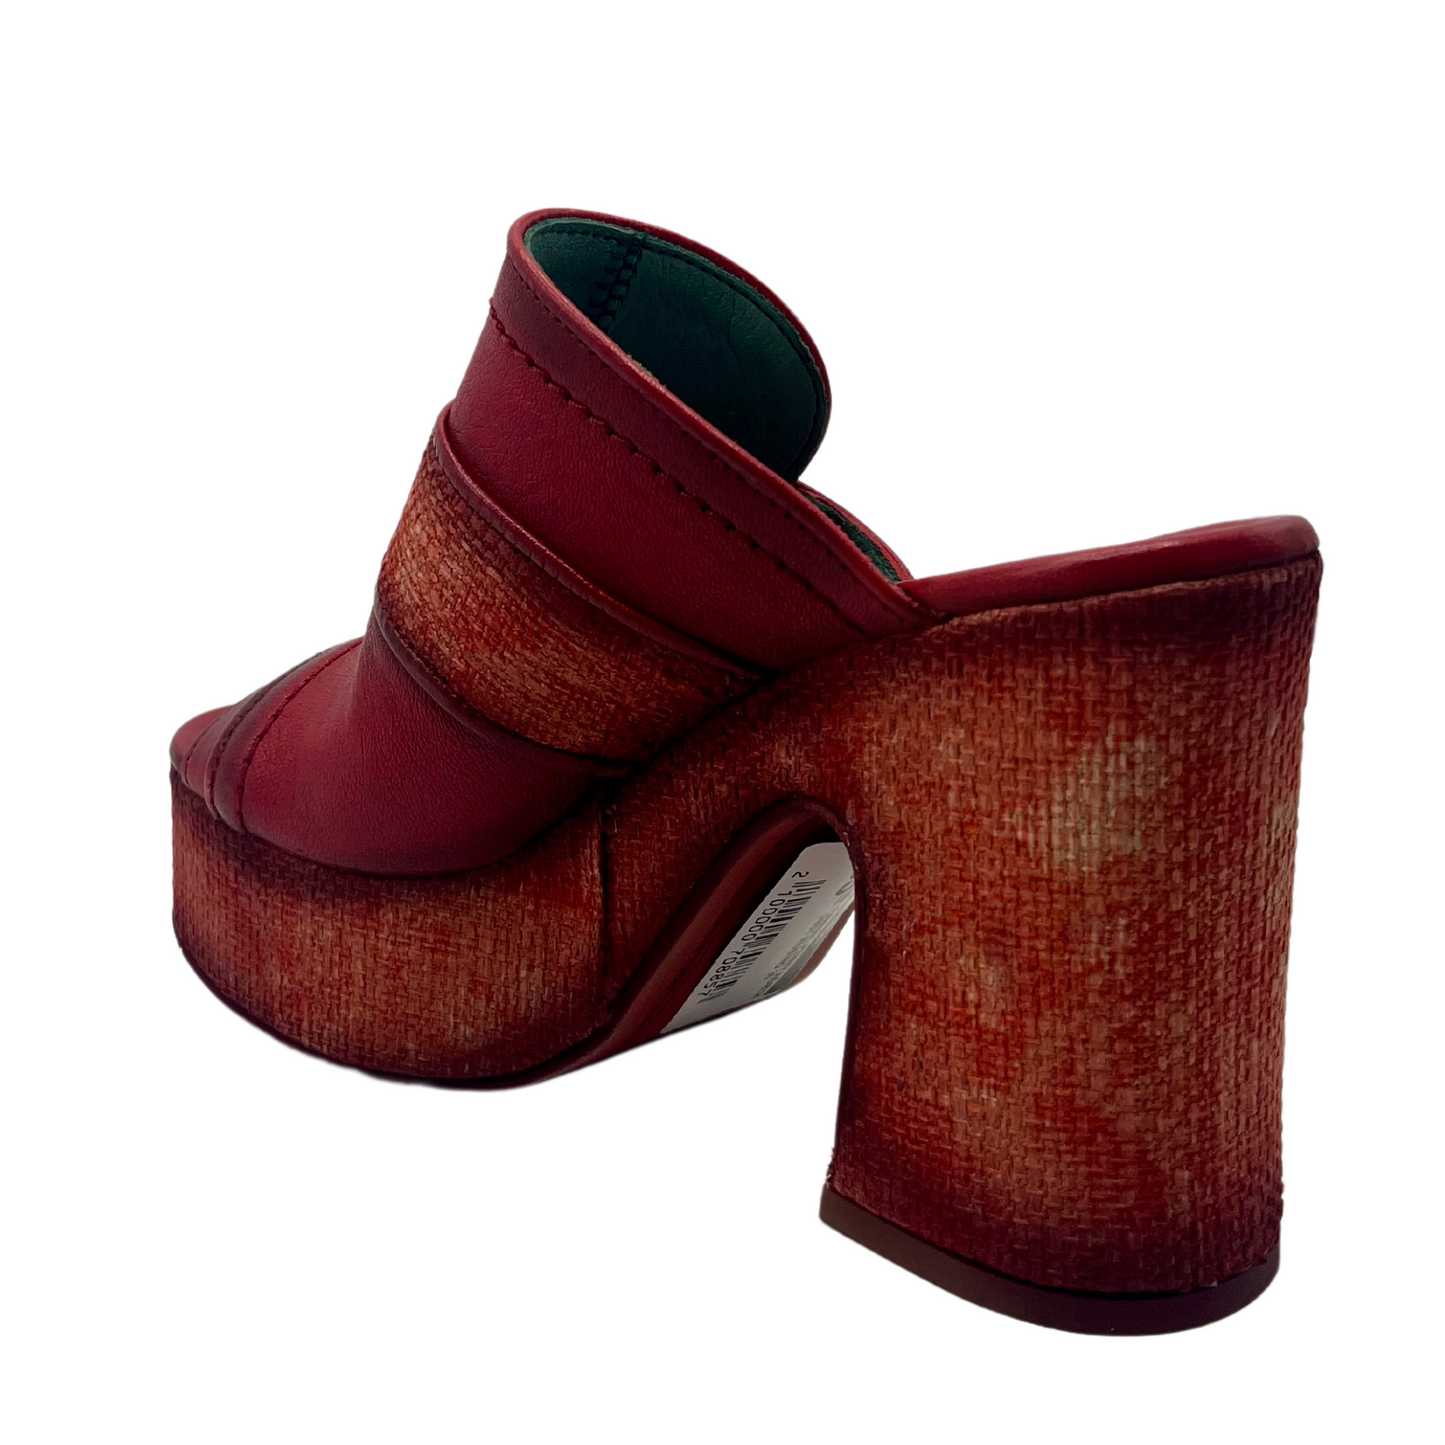 Back facing view of red leather shoe with chunky 4" heel and platform toe.